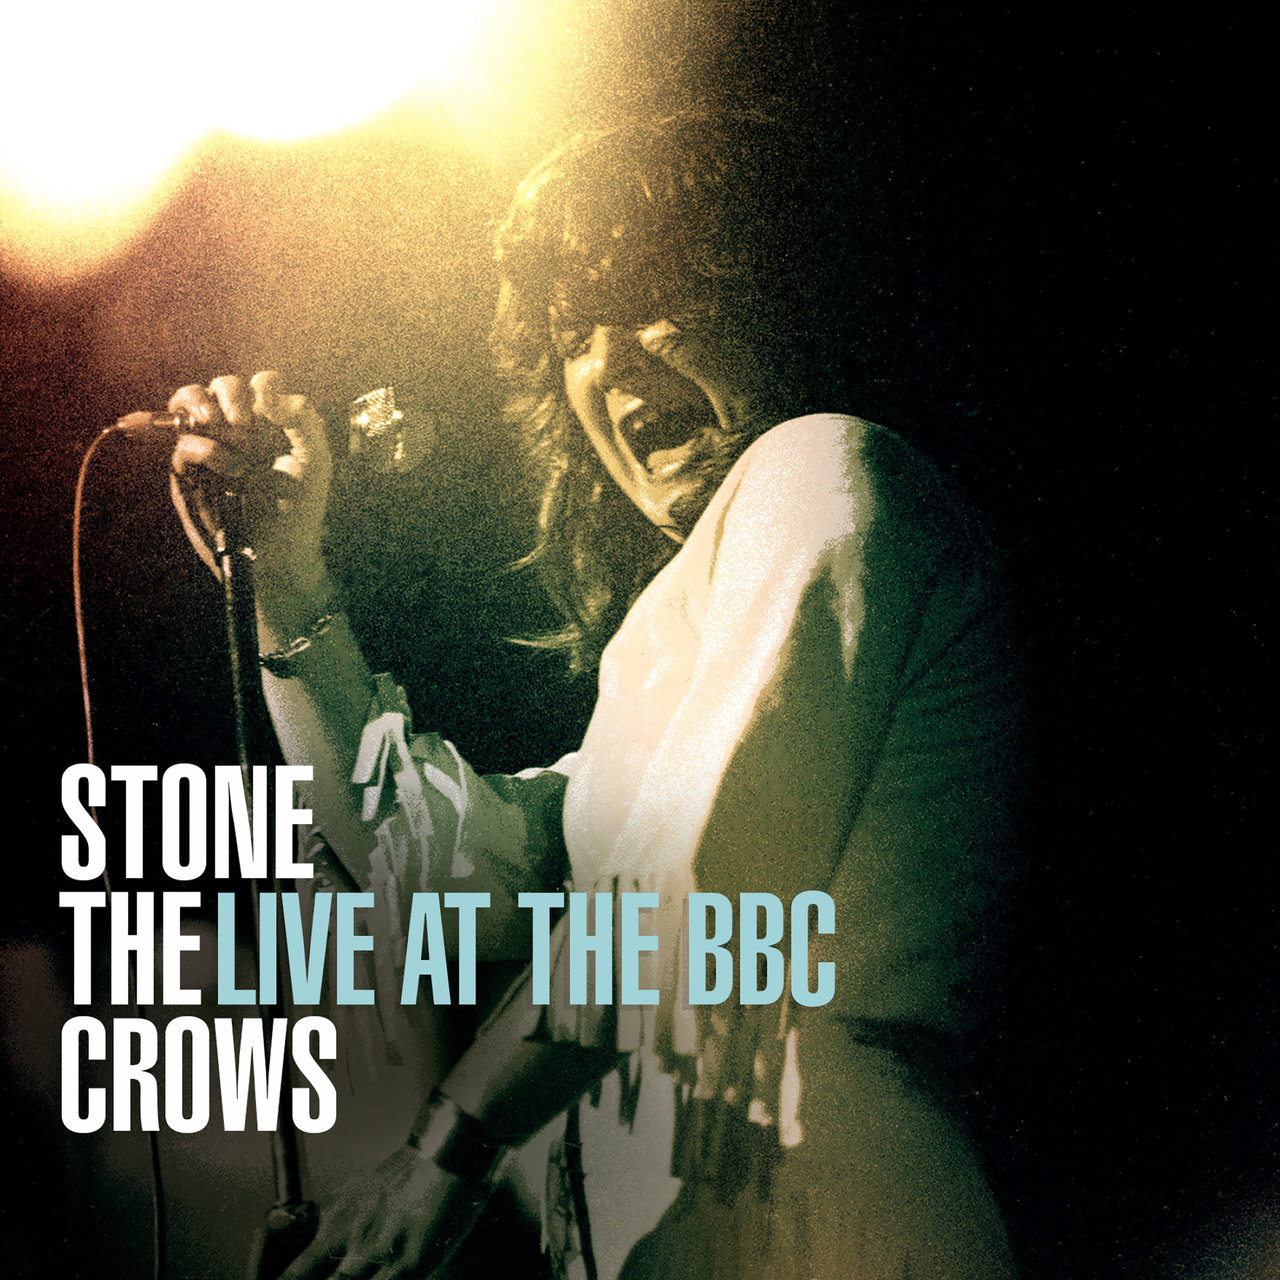 Stone The Crows - Live at the BBC [2022] cd1